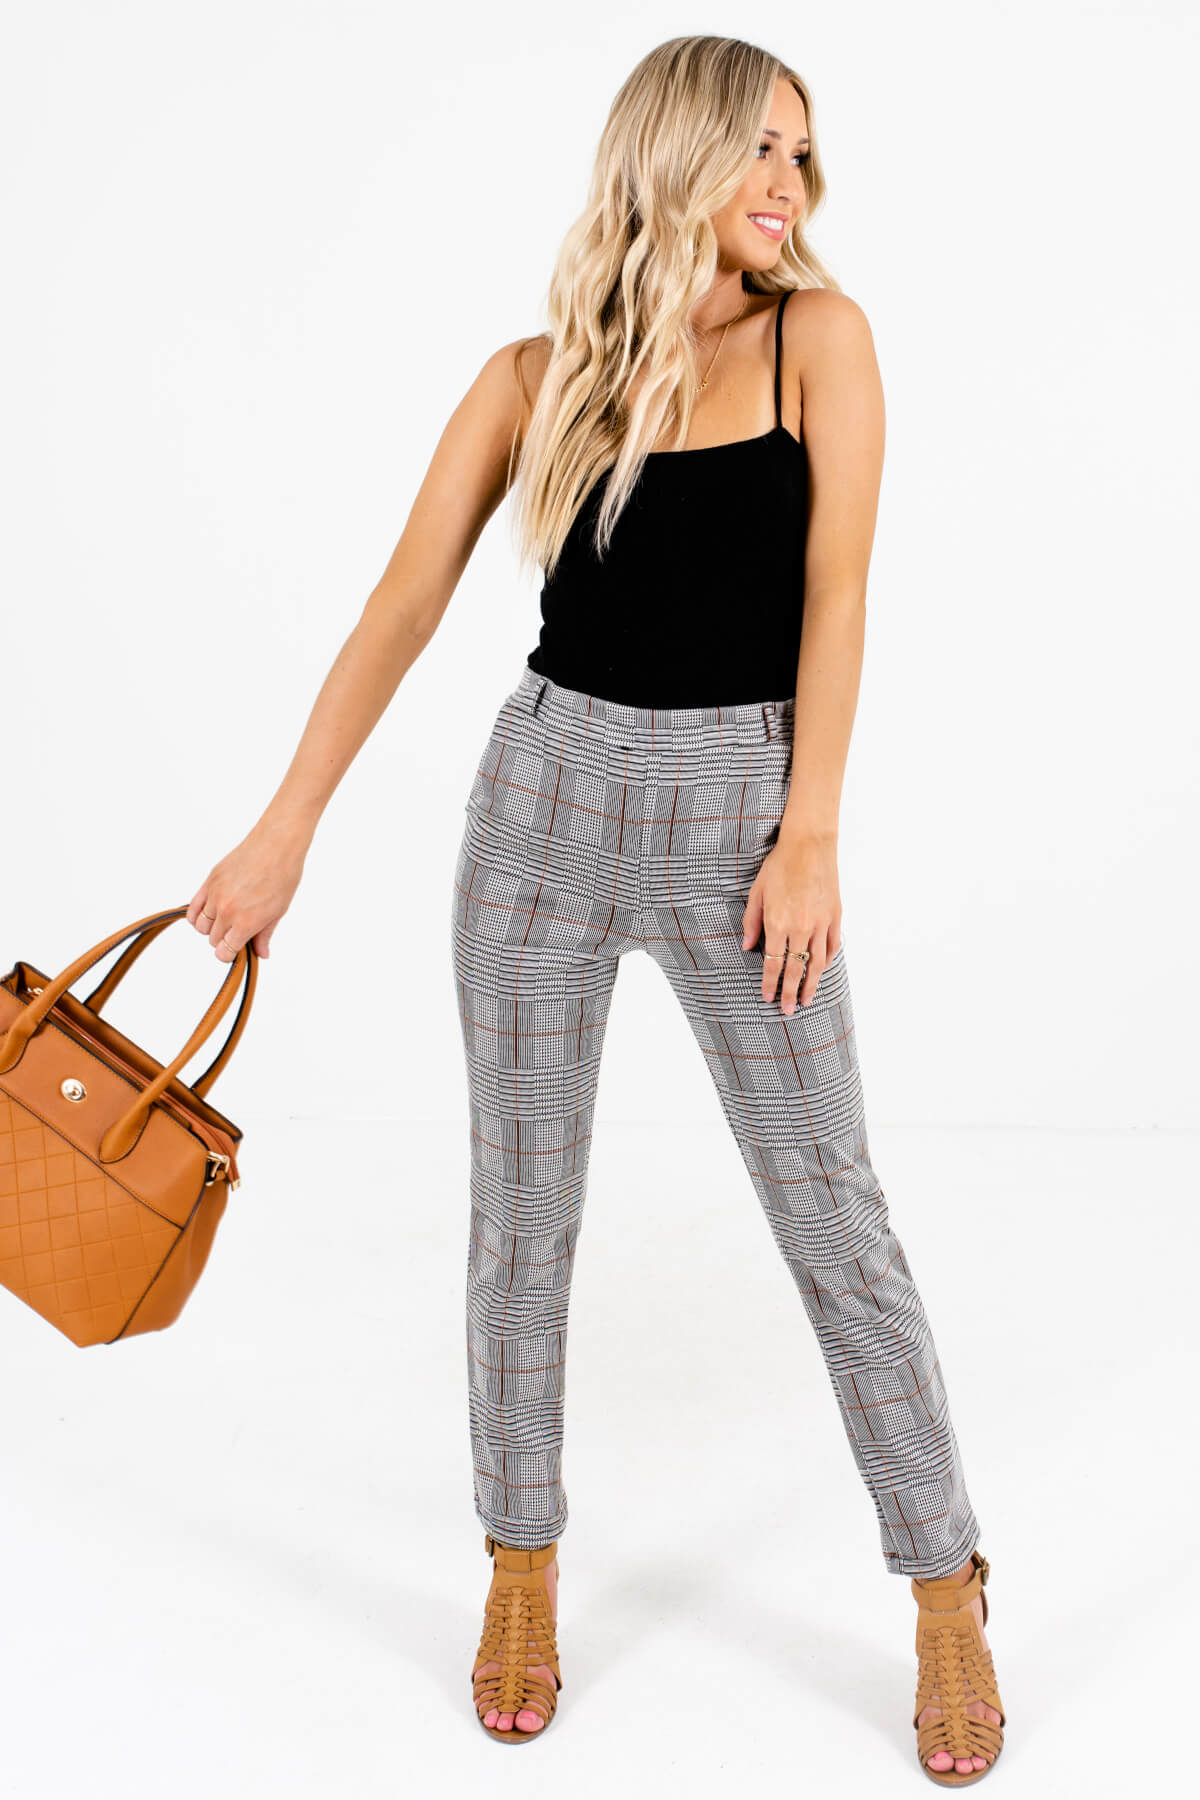 Gray Plaid Cute and Comfortable Boutique Pants for Women